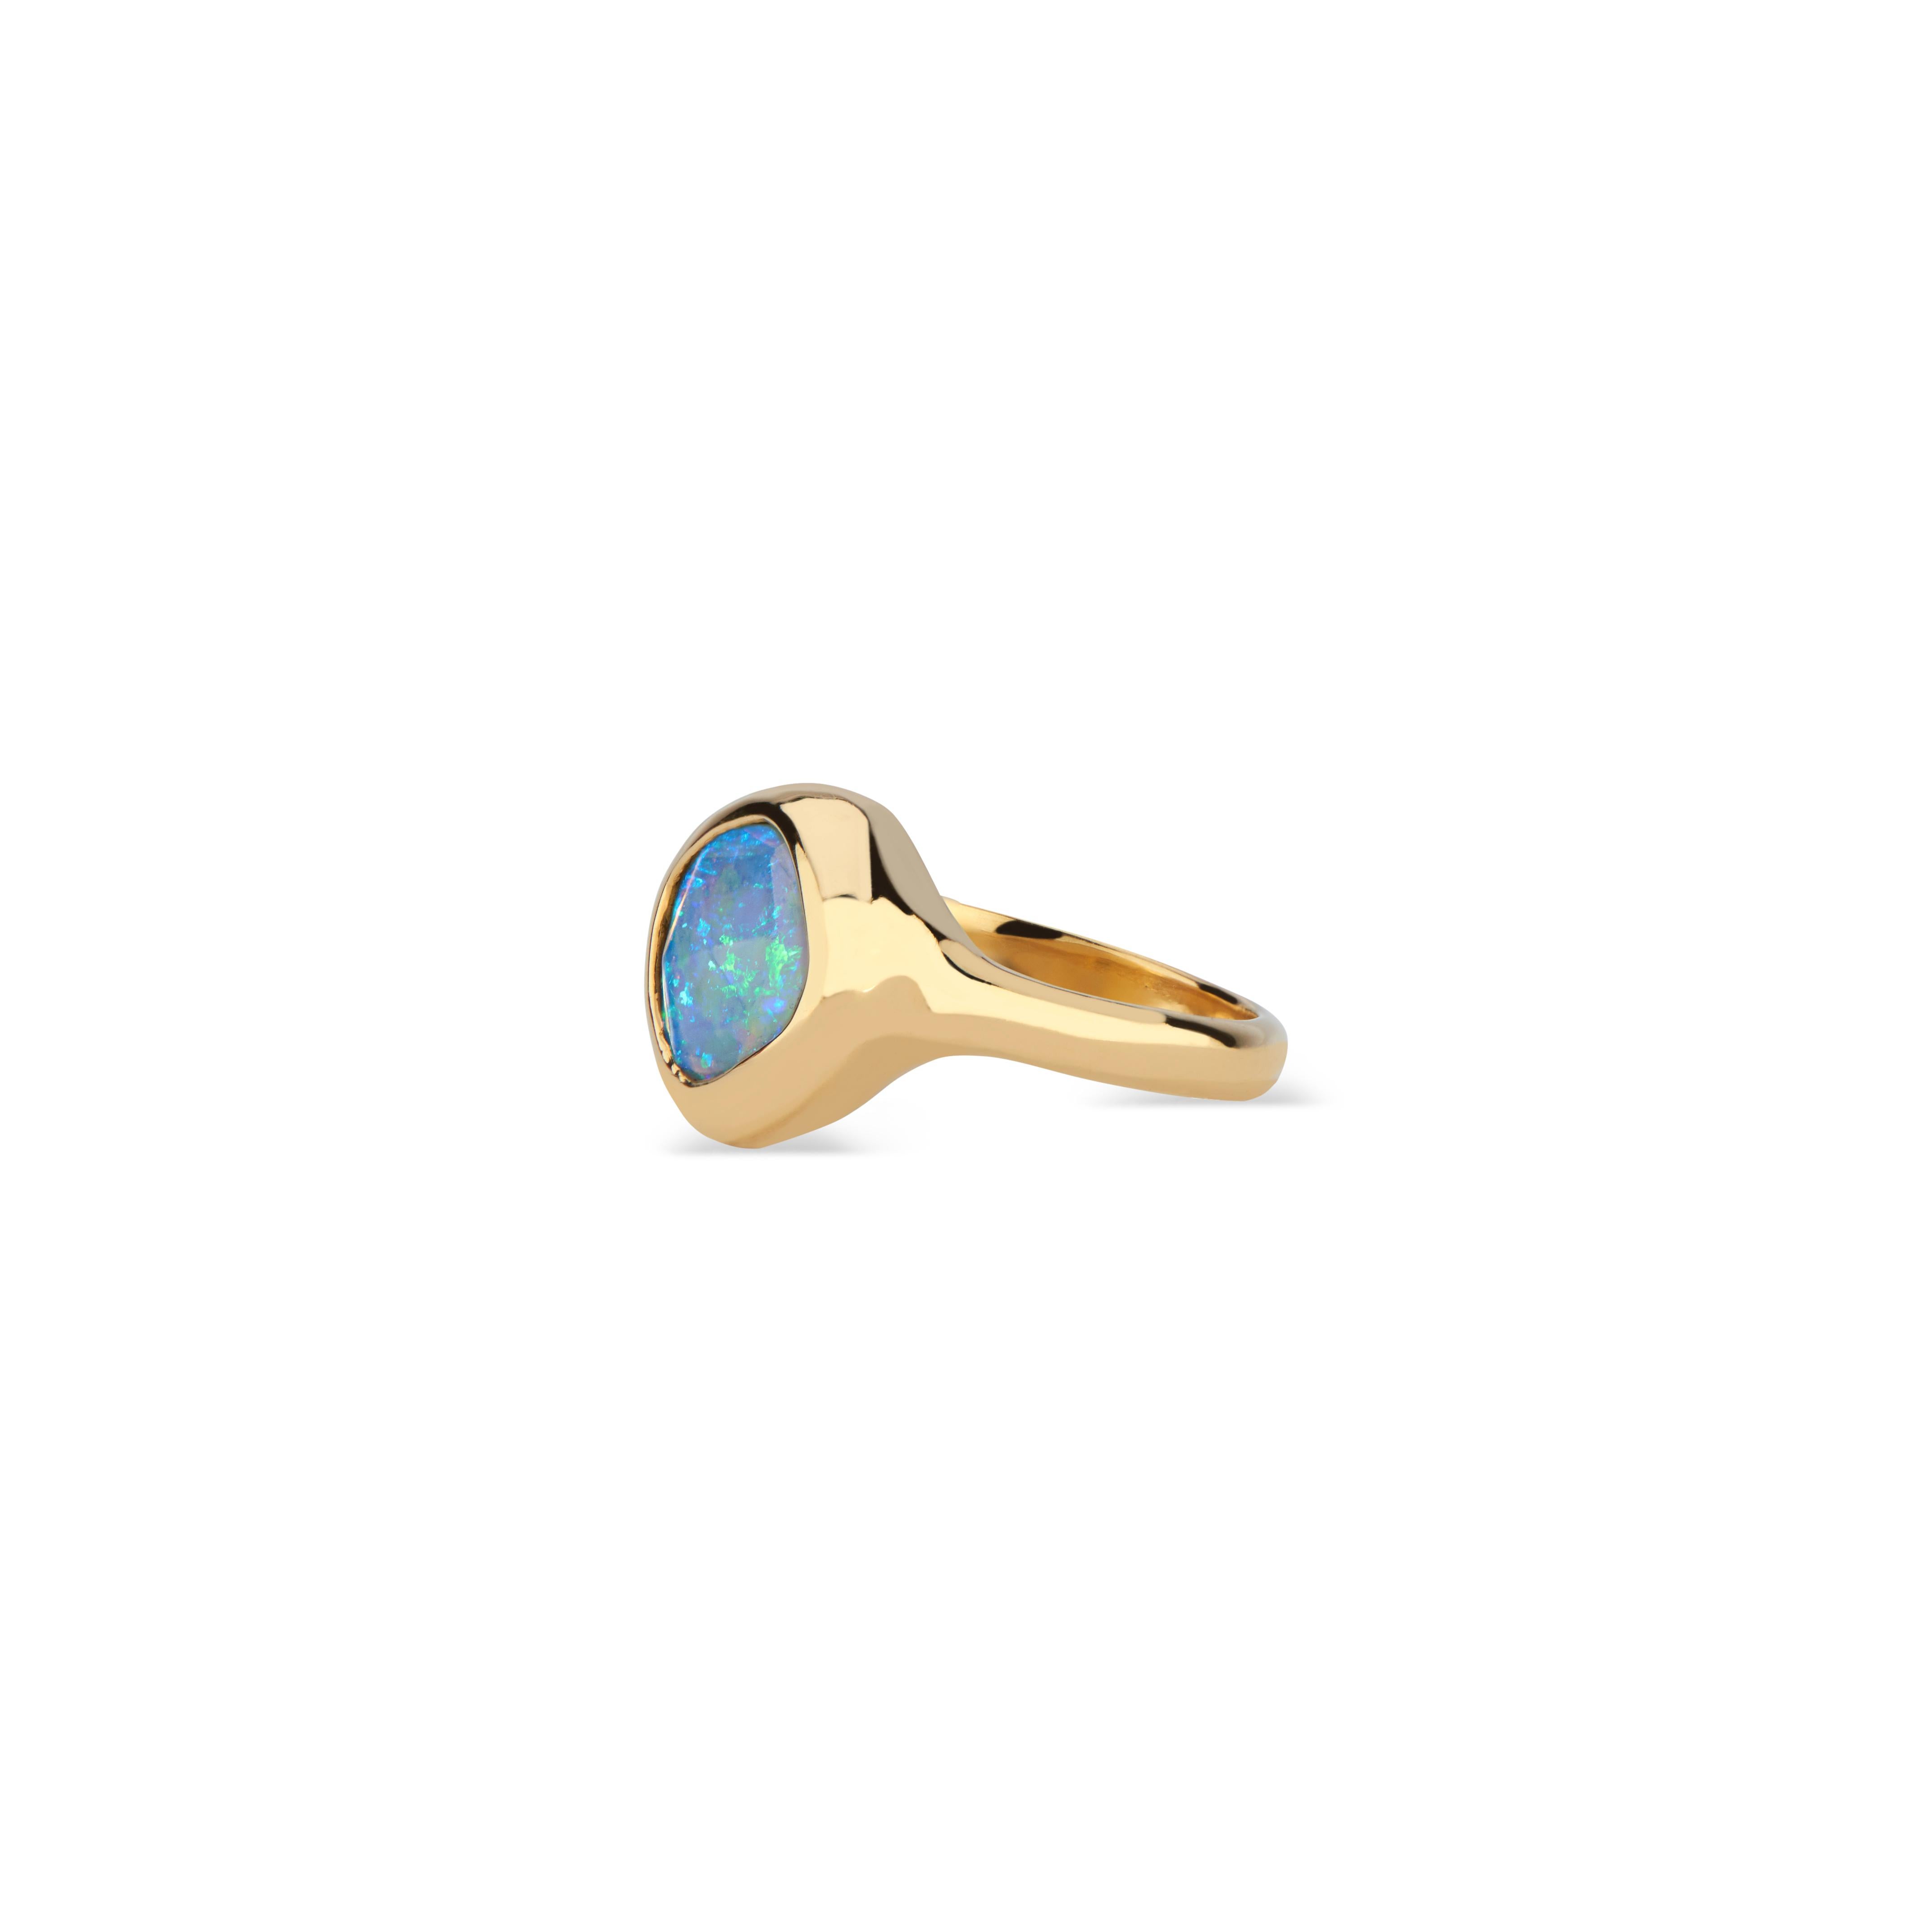 A uniquely-shaped opal stone from Ethiopia, rose cut, and set in a custom-designed bezel ring of 22k gold. The vibrancy of the stone is enhanced by the 92% gold content. 